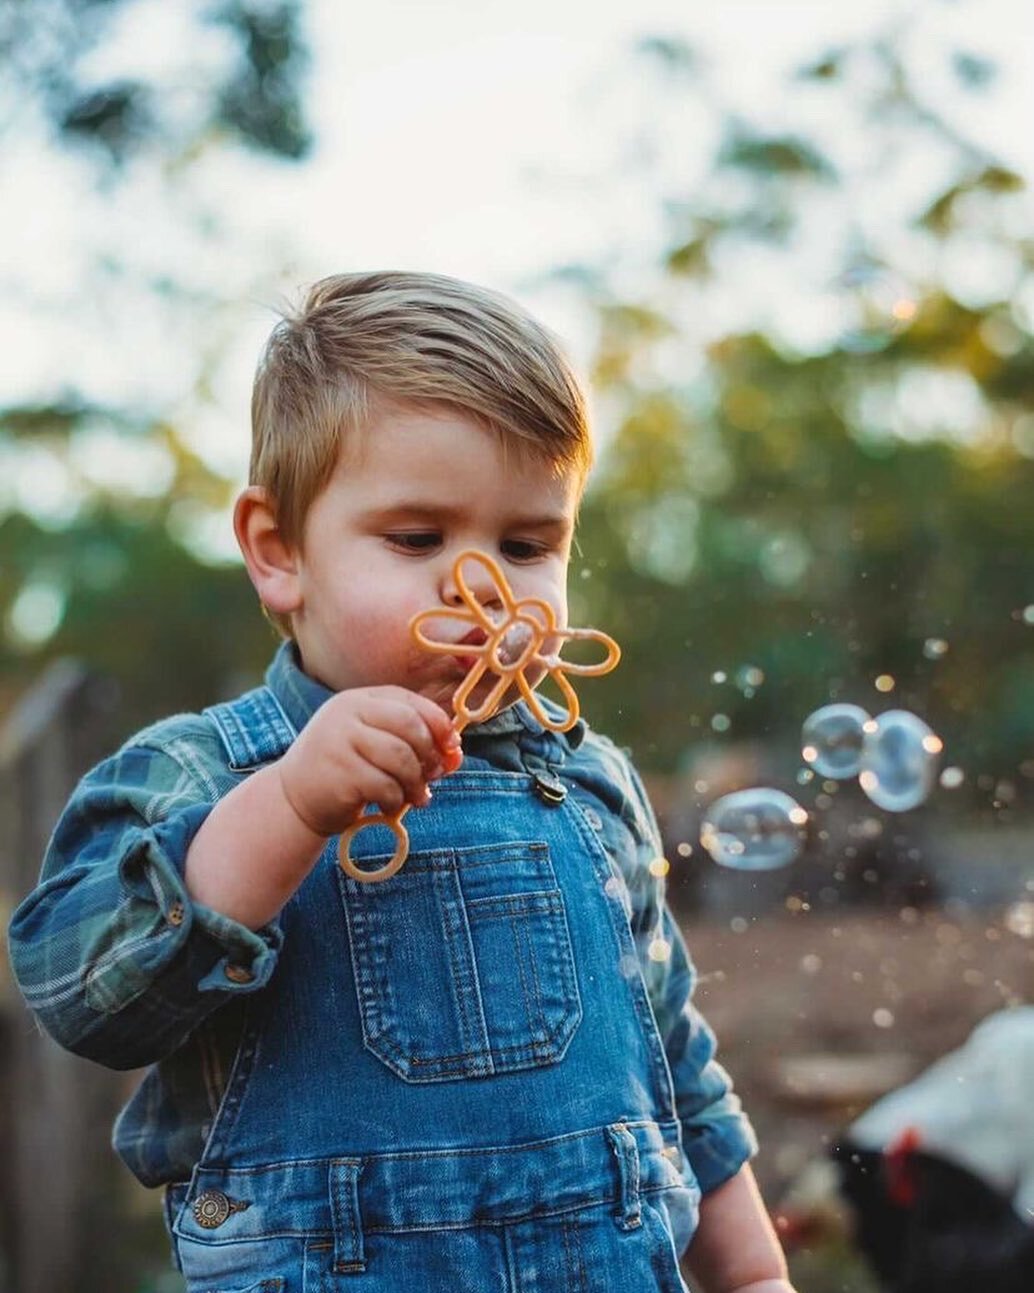 Overalls &amp; bubble play 😍 Need I say more... Image by @this.is.our.wild